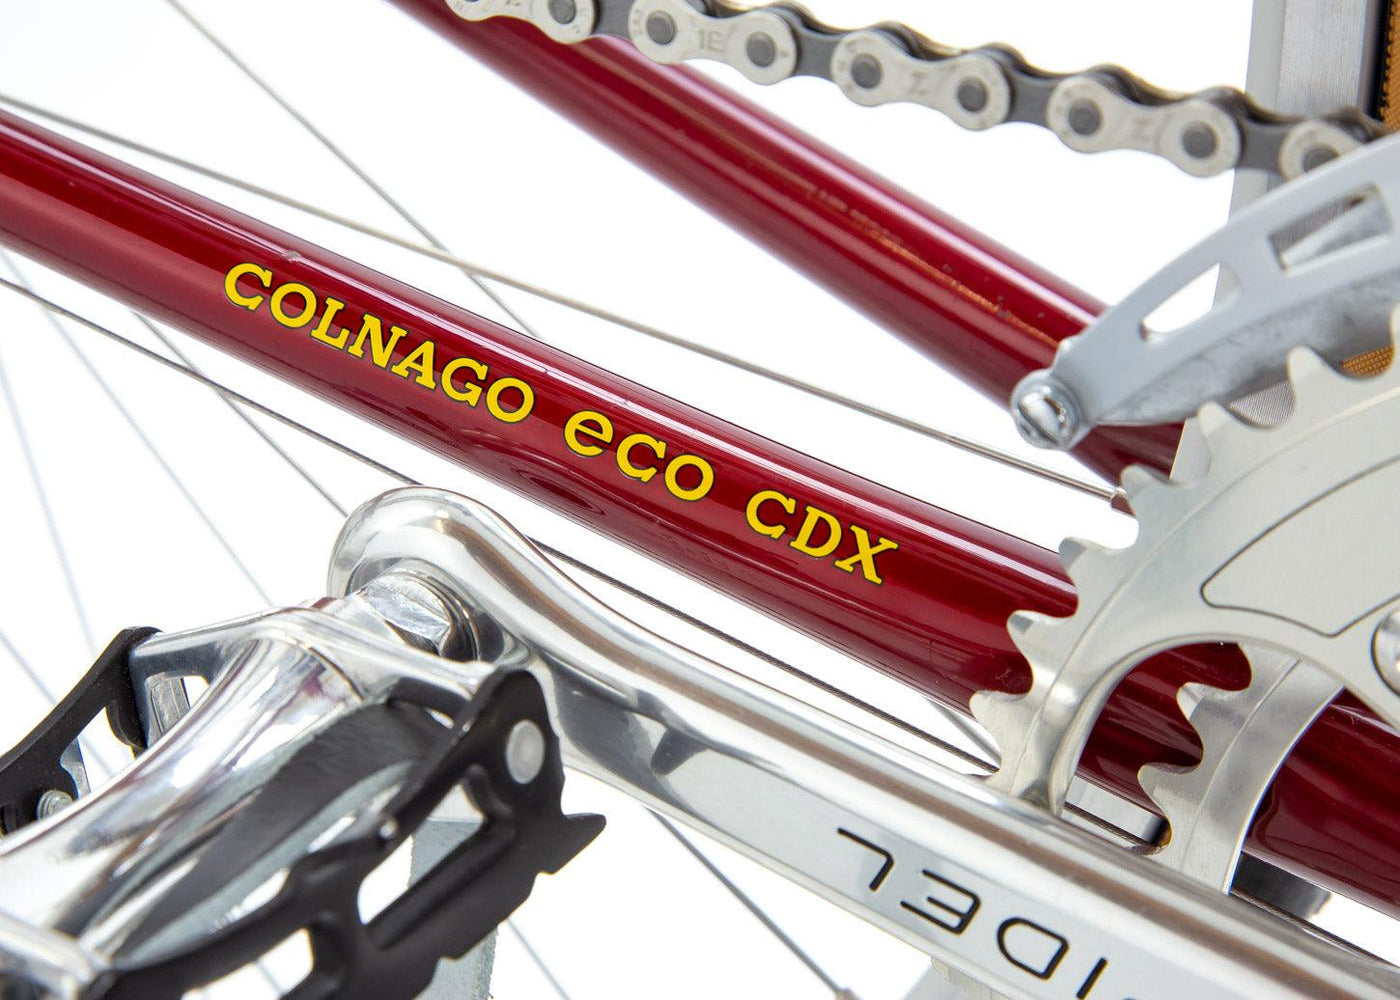 Colnago Eco CDX Classic Road Bicycle 1980s NOS | Steel Vintage Bikes